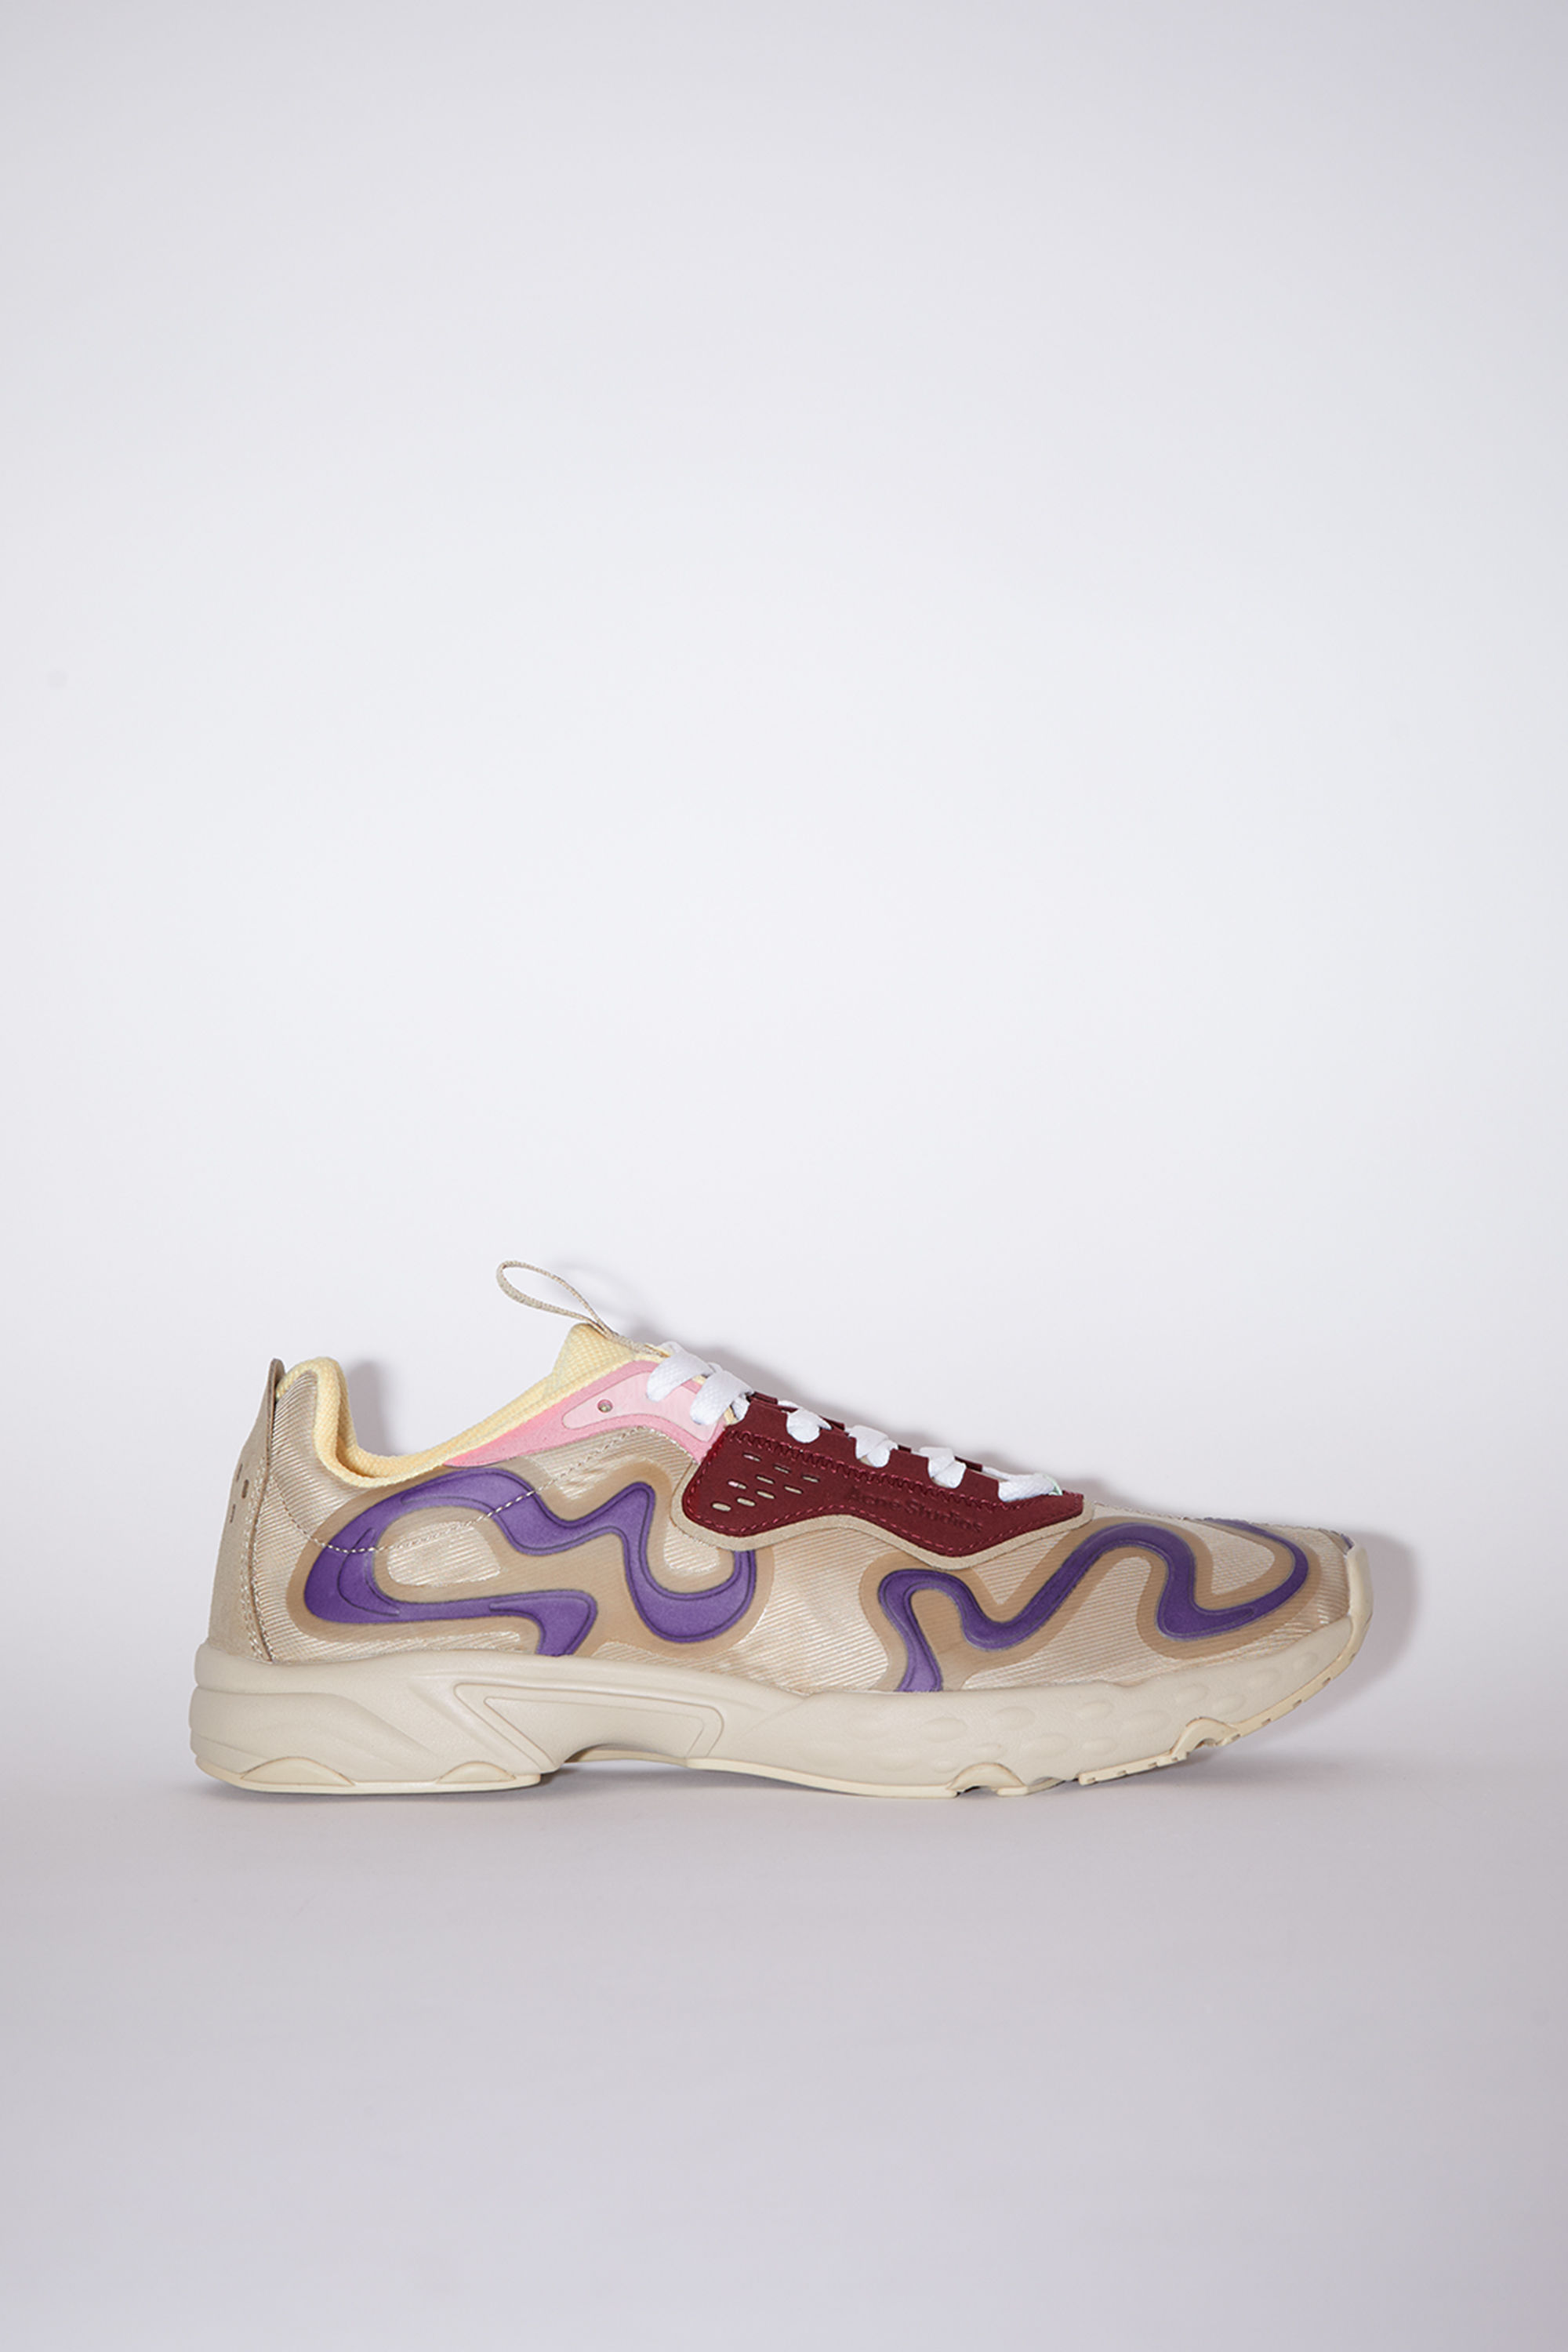 ACNE STUDIOS RIBBON LOGO LACE-UP SNEAKERS